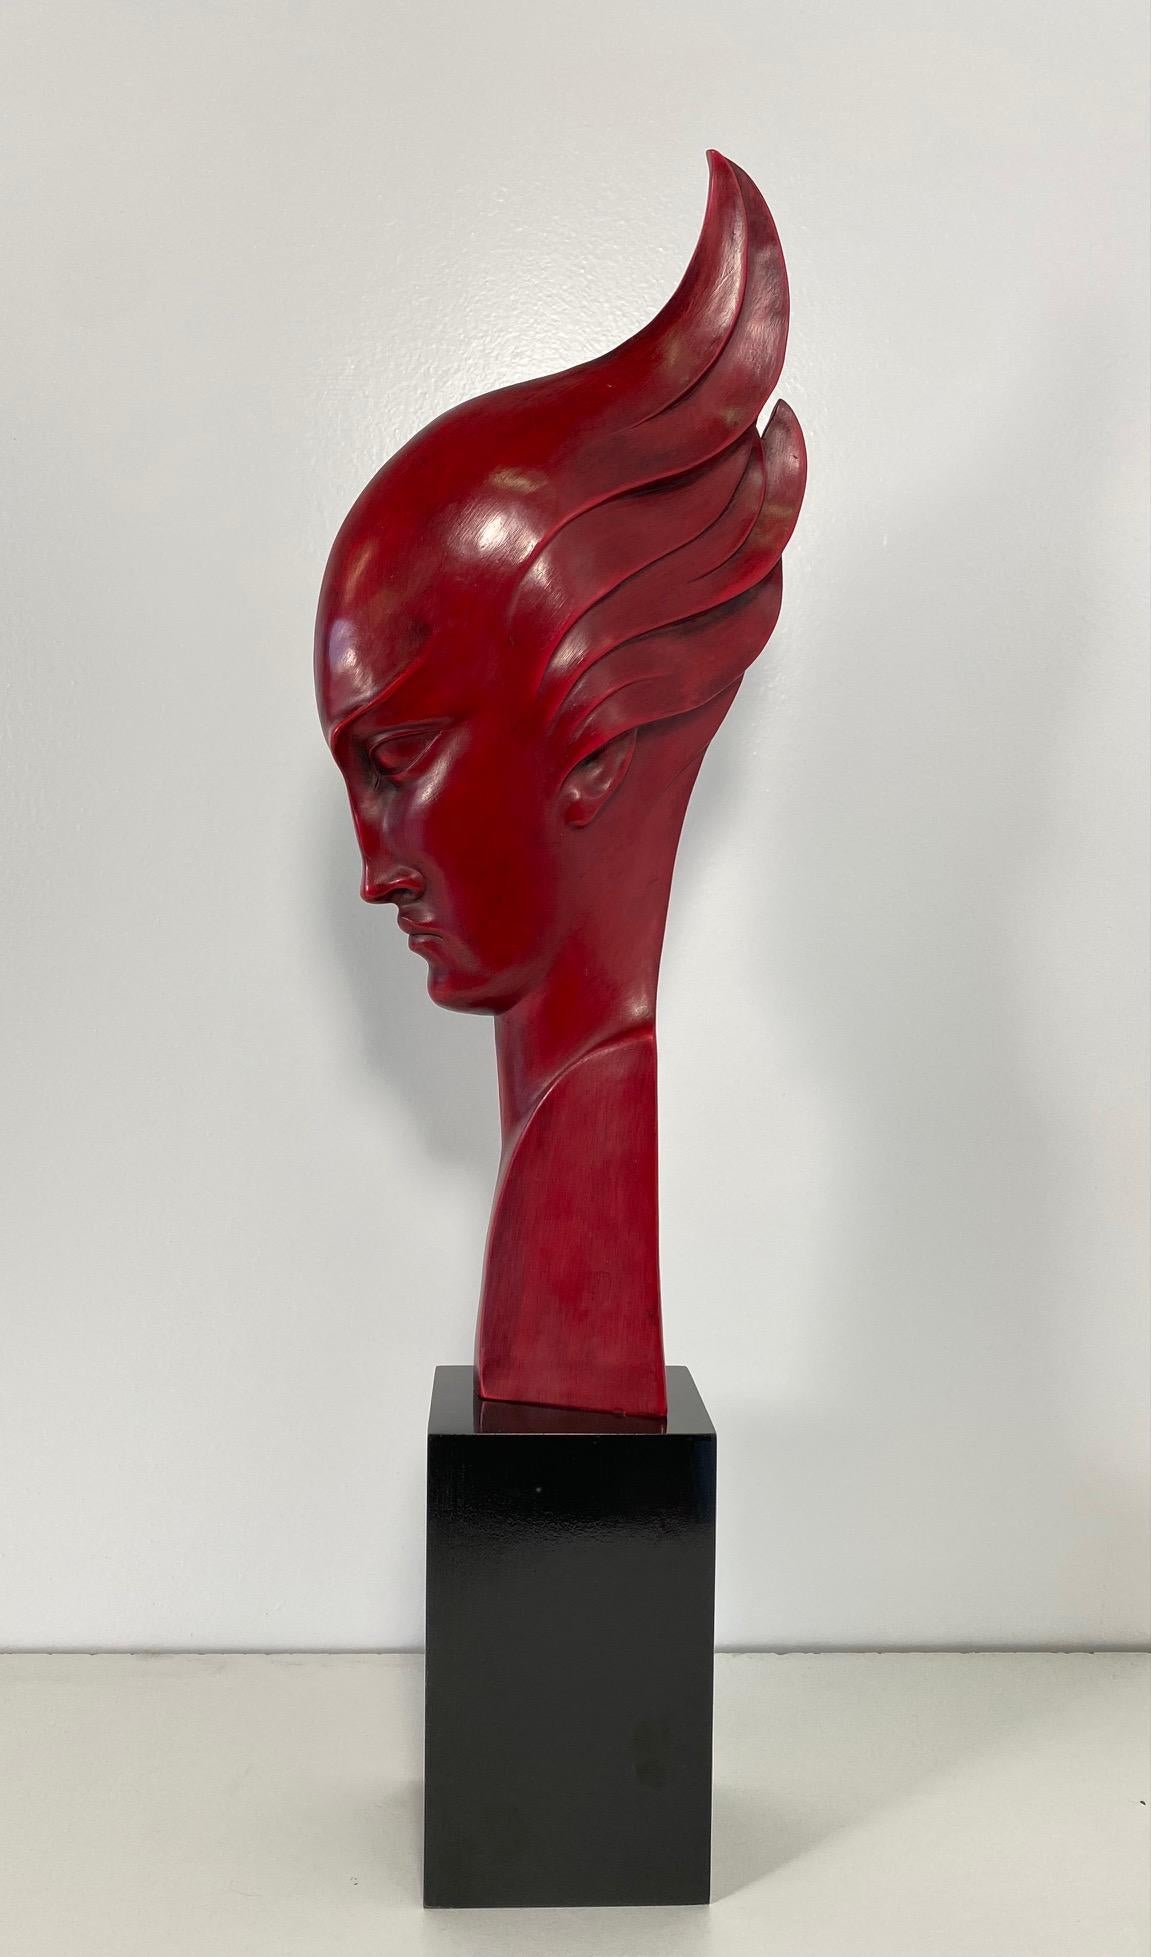 This Art Deco sculpture was produced in Italy and more precisely in Milan, by Guido Cacciapuoti in the 1930s. 

The base is in ebonized wood and the sculpture, a typical Art Deco stylized woman profile face, is in in red porcelain stoneware.

On